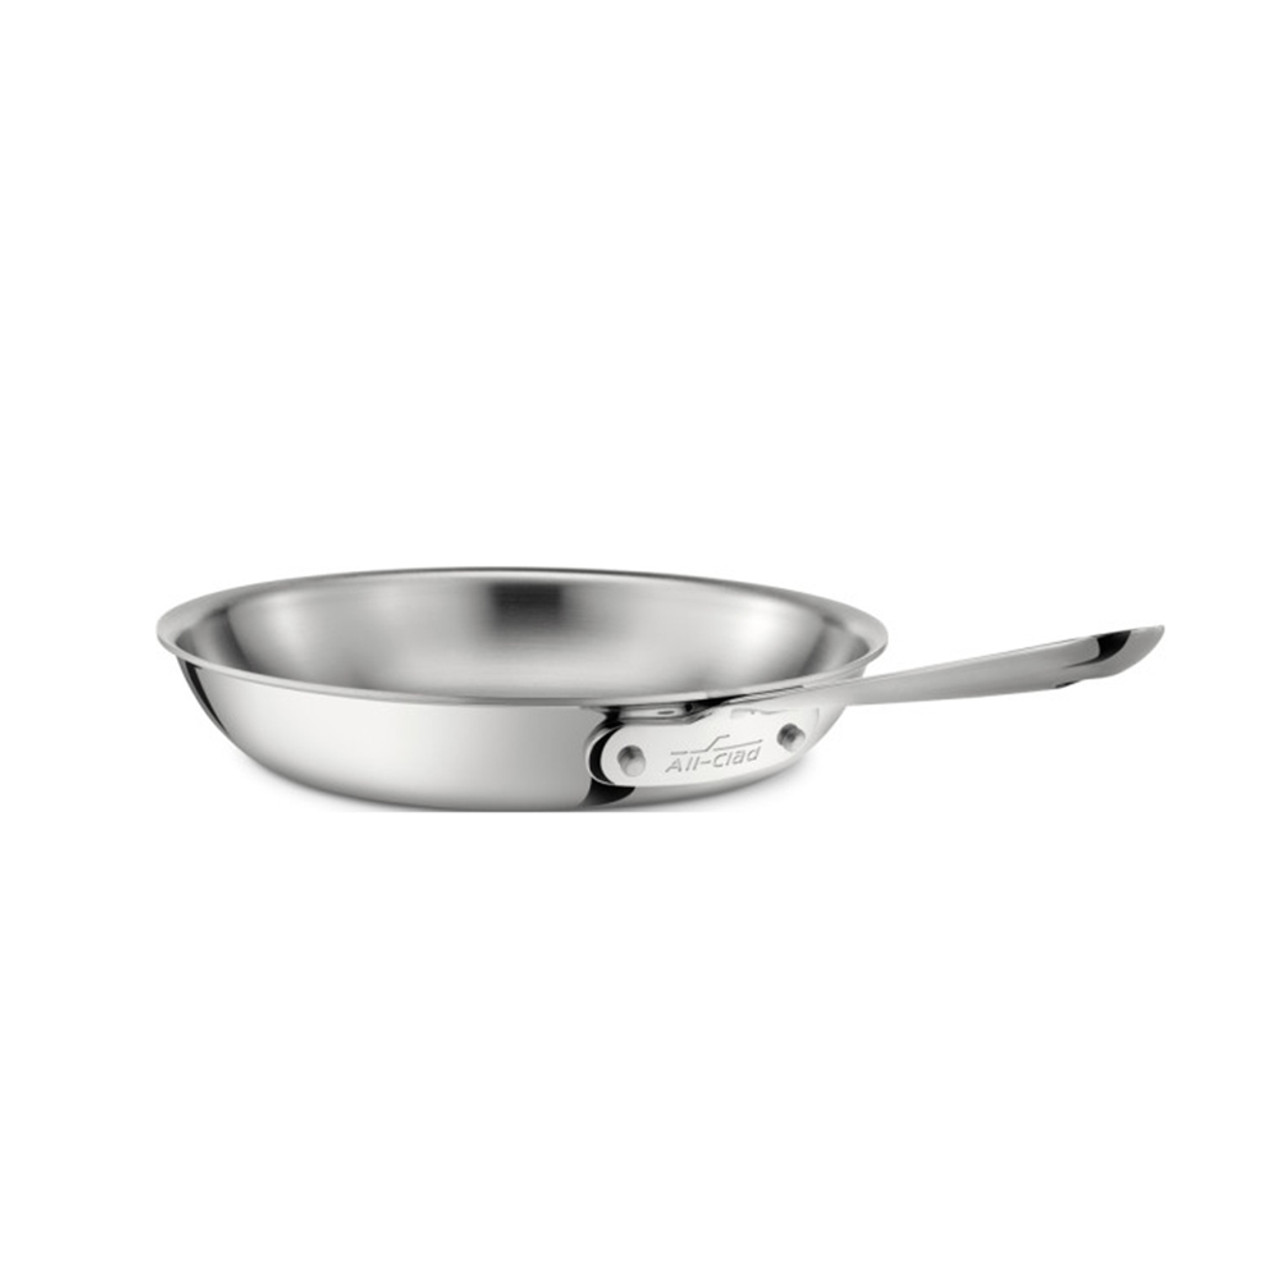 All Clad Non-Stick Frying Pan Black Steel Handle Fry Pan Skillet